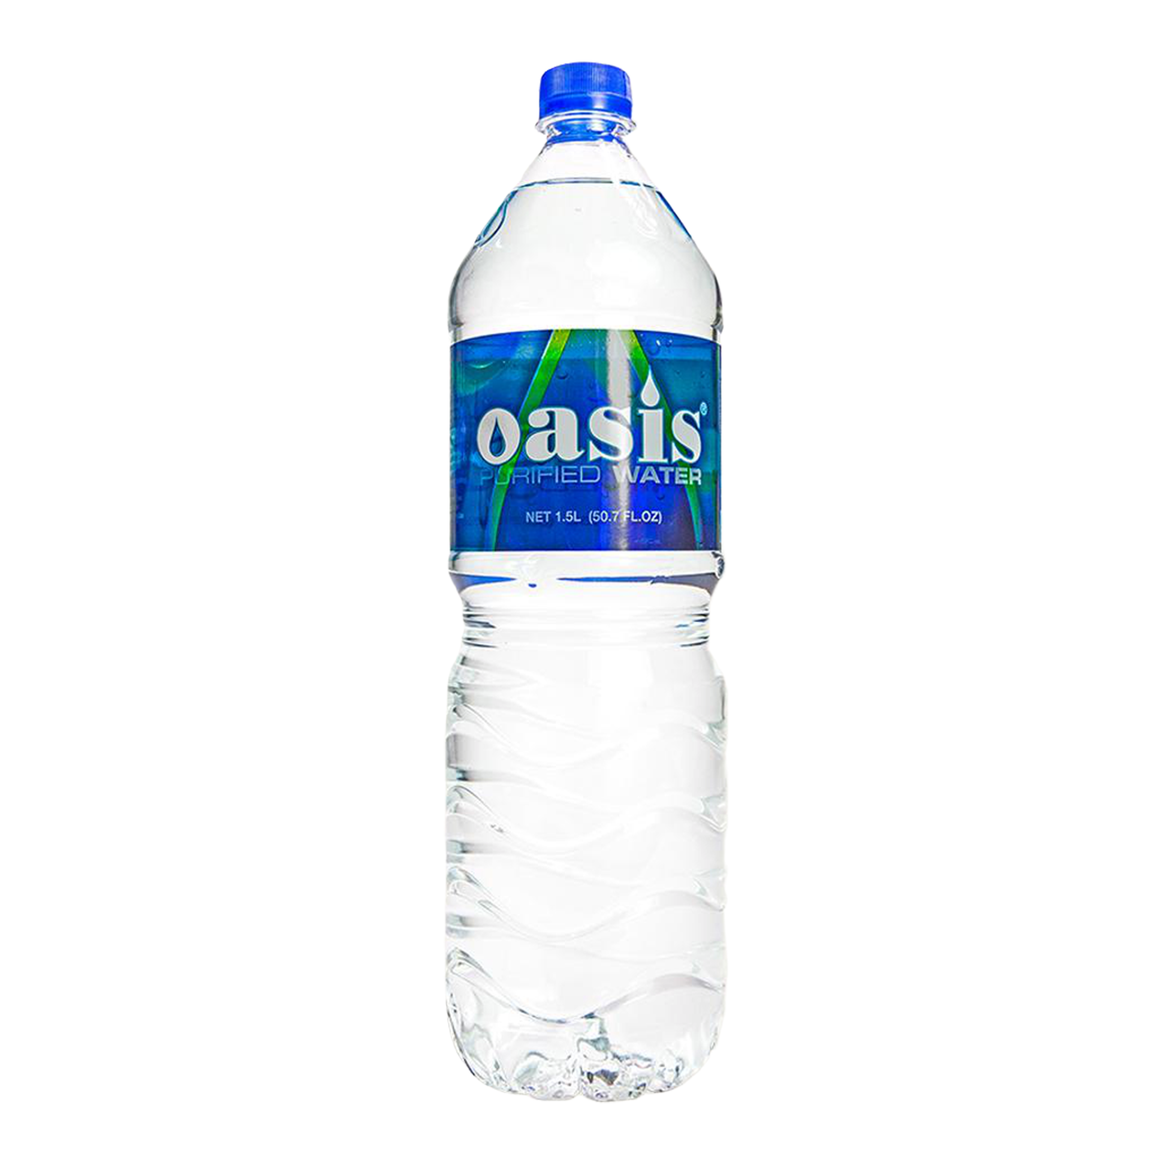 OASIS PURIFIED WATER 1.5 Litre - Premier Cru Retail Stores